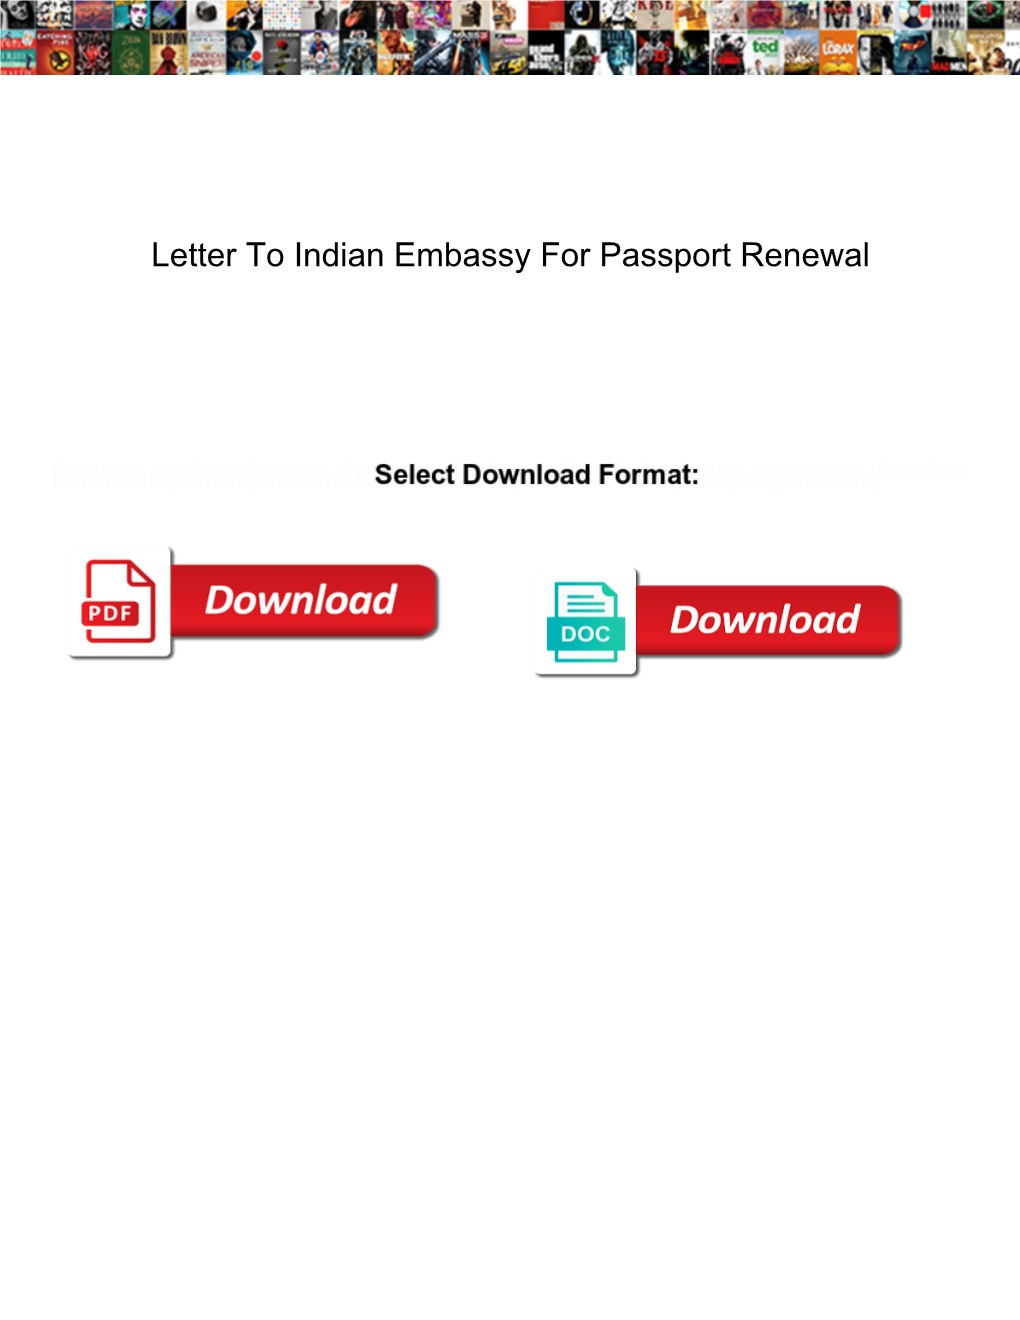 Letter to Indian Embassy for Passport Renewal